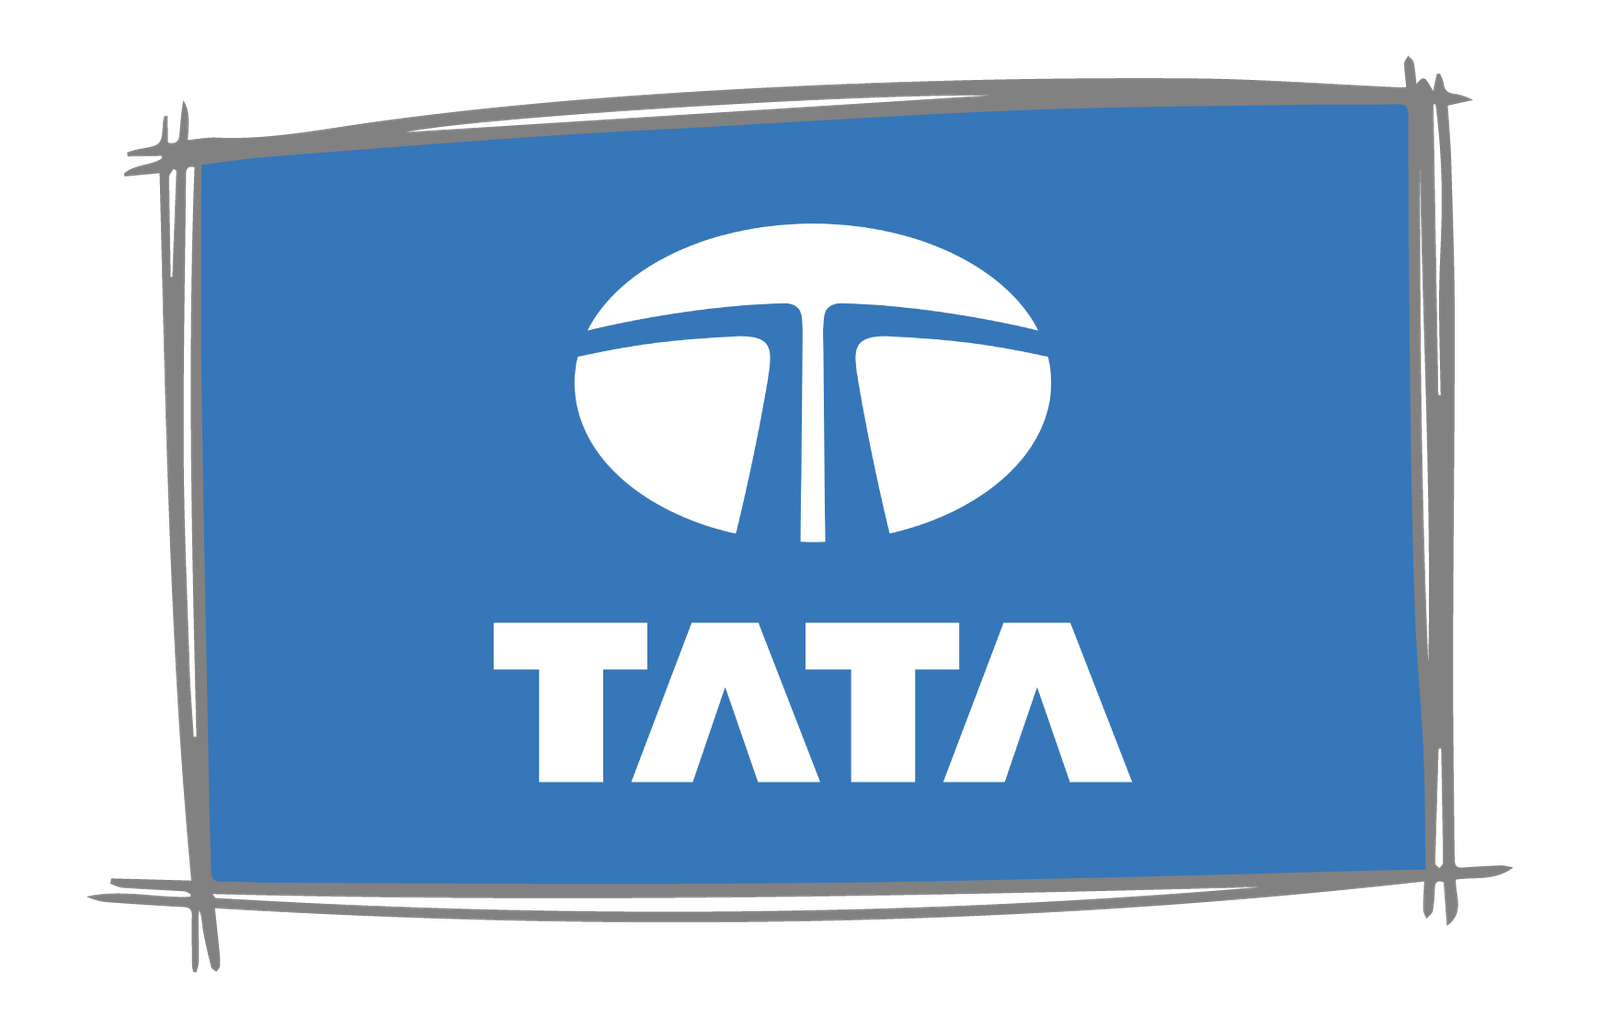 Tata Group for brand voice and messaging